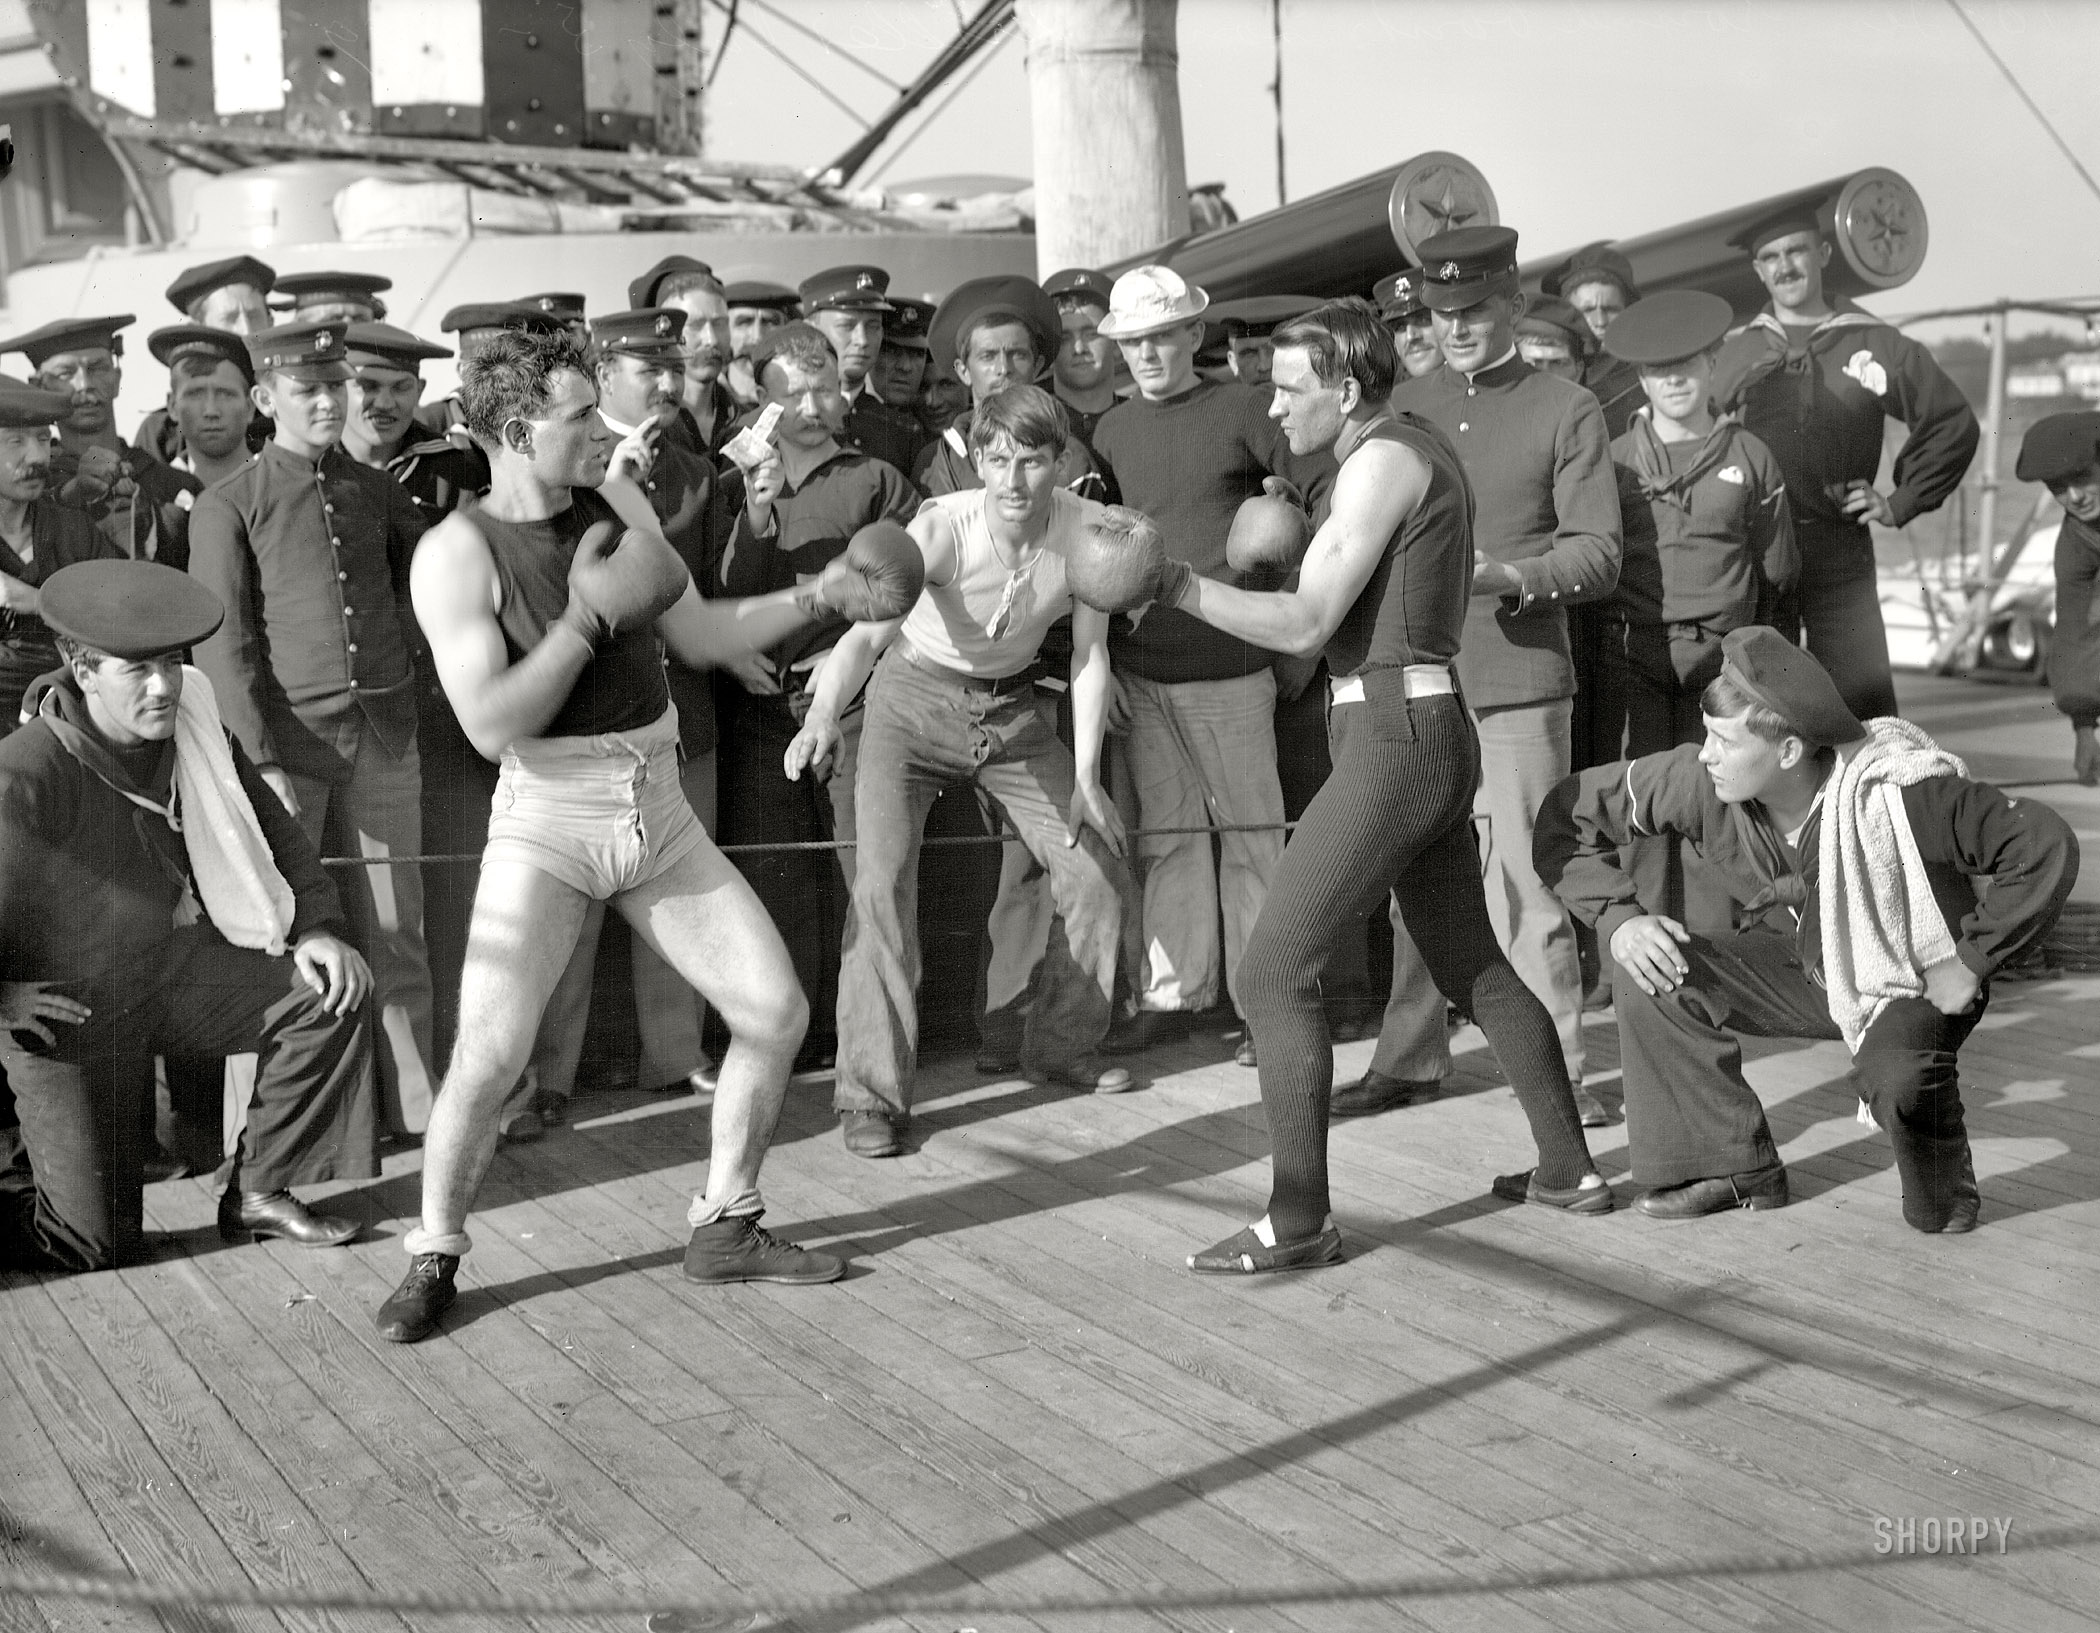 July 3, 1899, aboard the U.S.S. New York. "A 10-round bout, anniversary of Santiago." Photo by Edward H. Hart, Detroit Publishing Co. View full size.